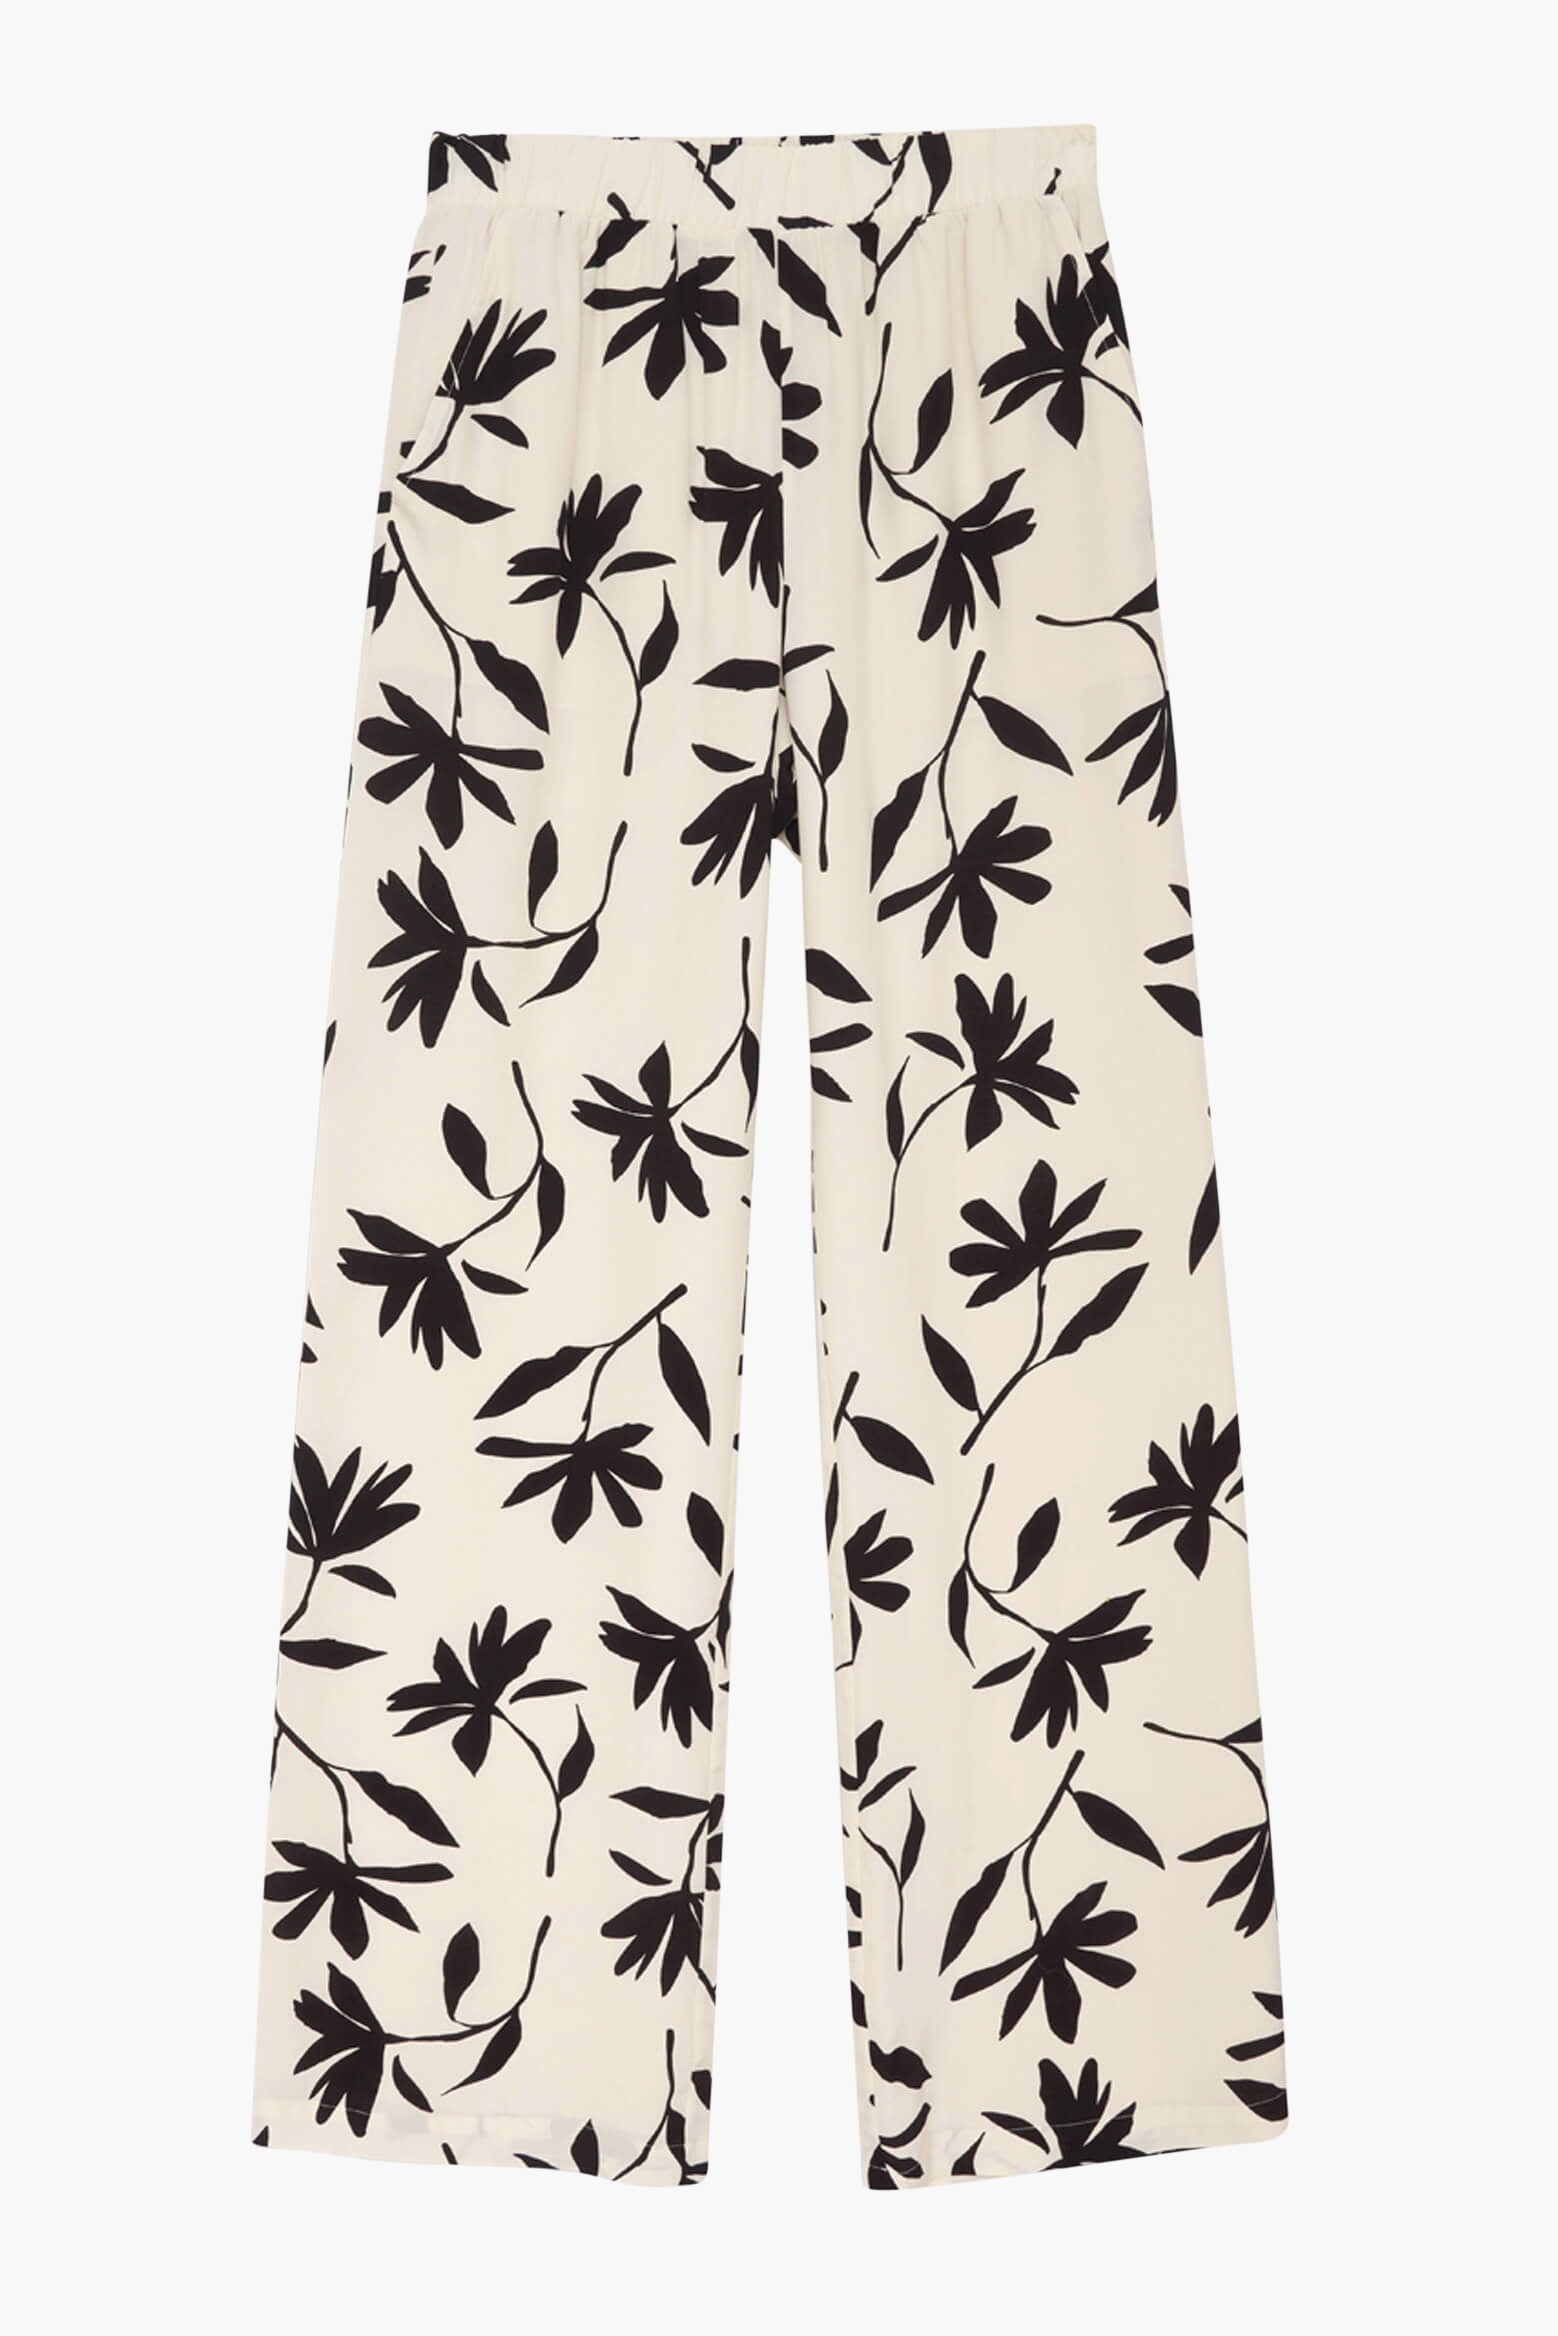 Anine Bing Owen Pant in Ivory Daisy available at TNT The New Trend Australia.